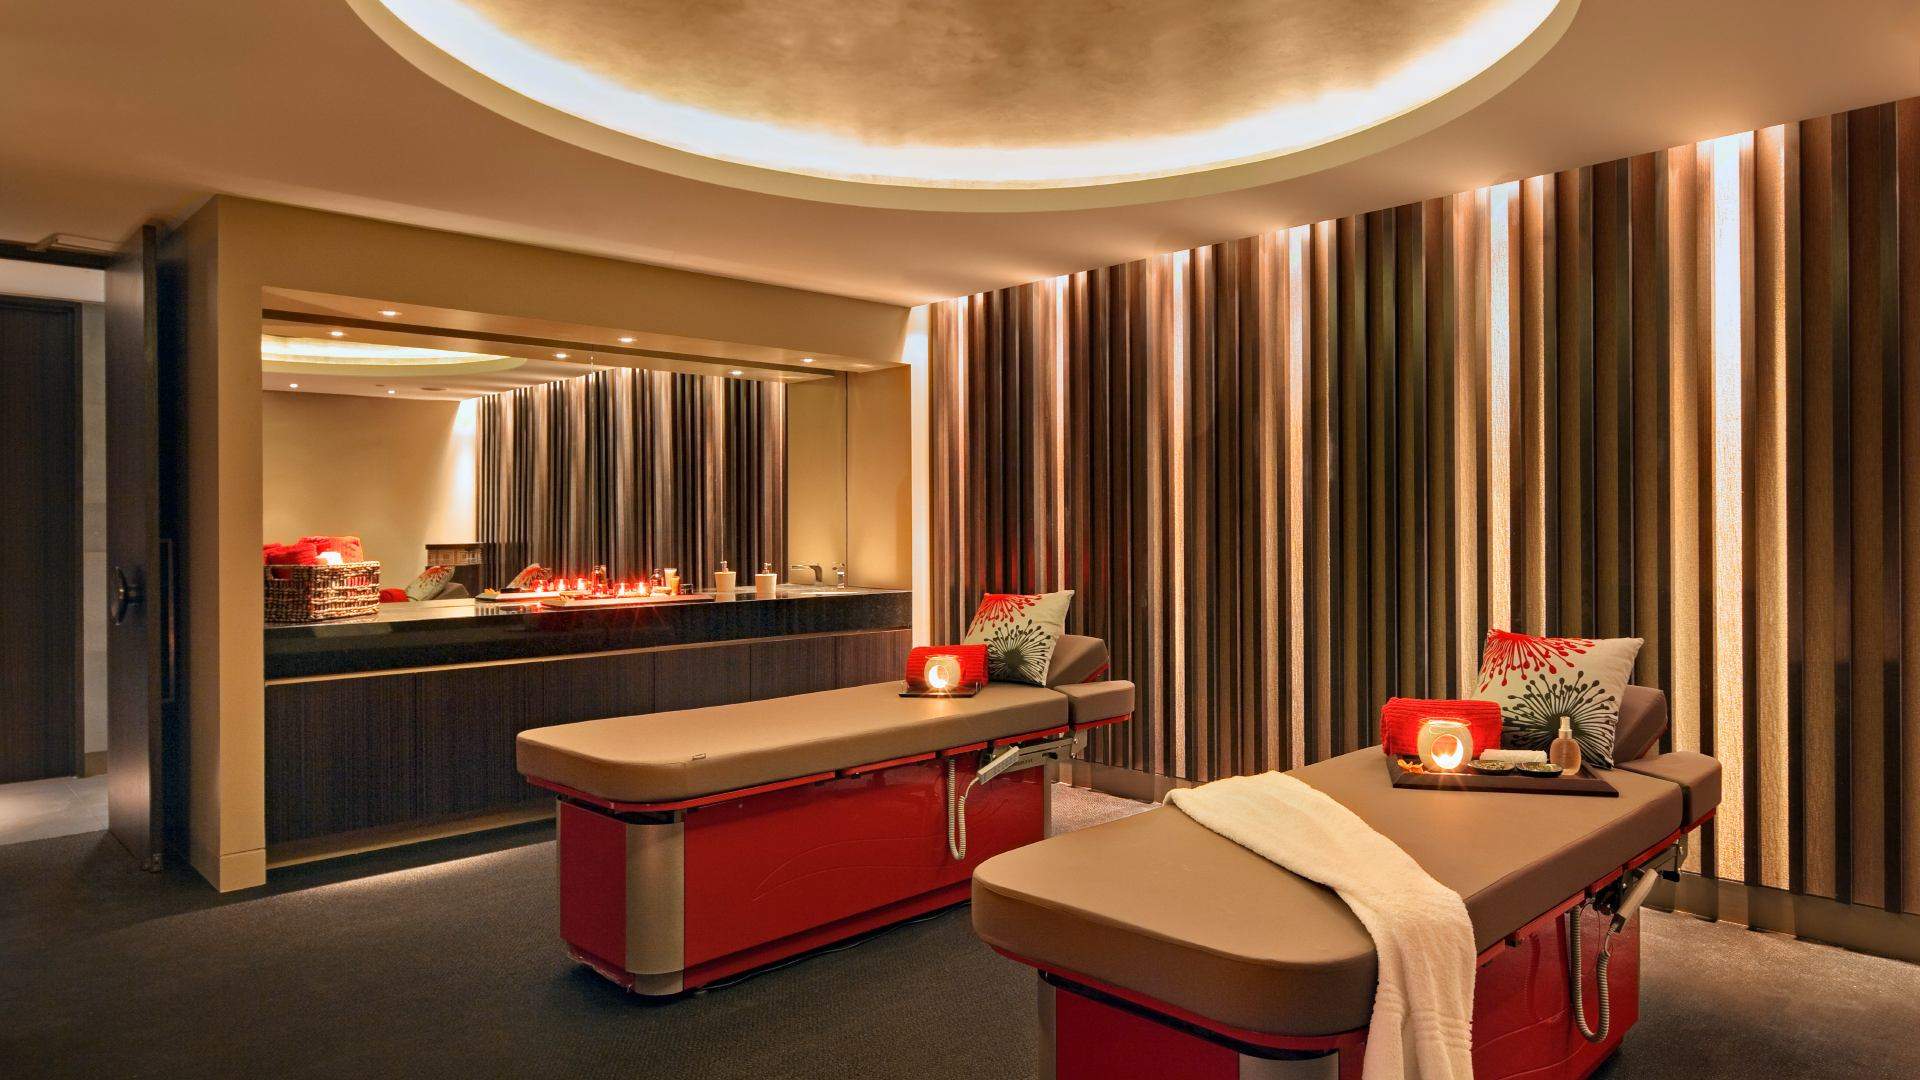 The couples' spa treatment room at Darling Spa - one of the best day spas in Sydney.